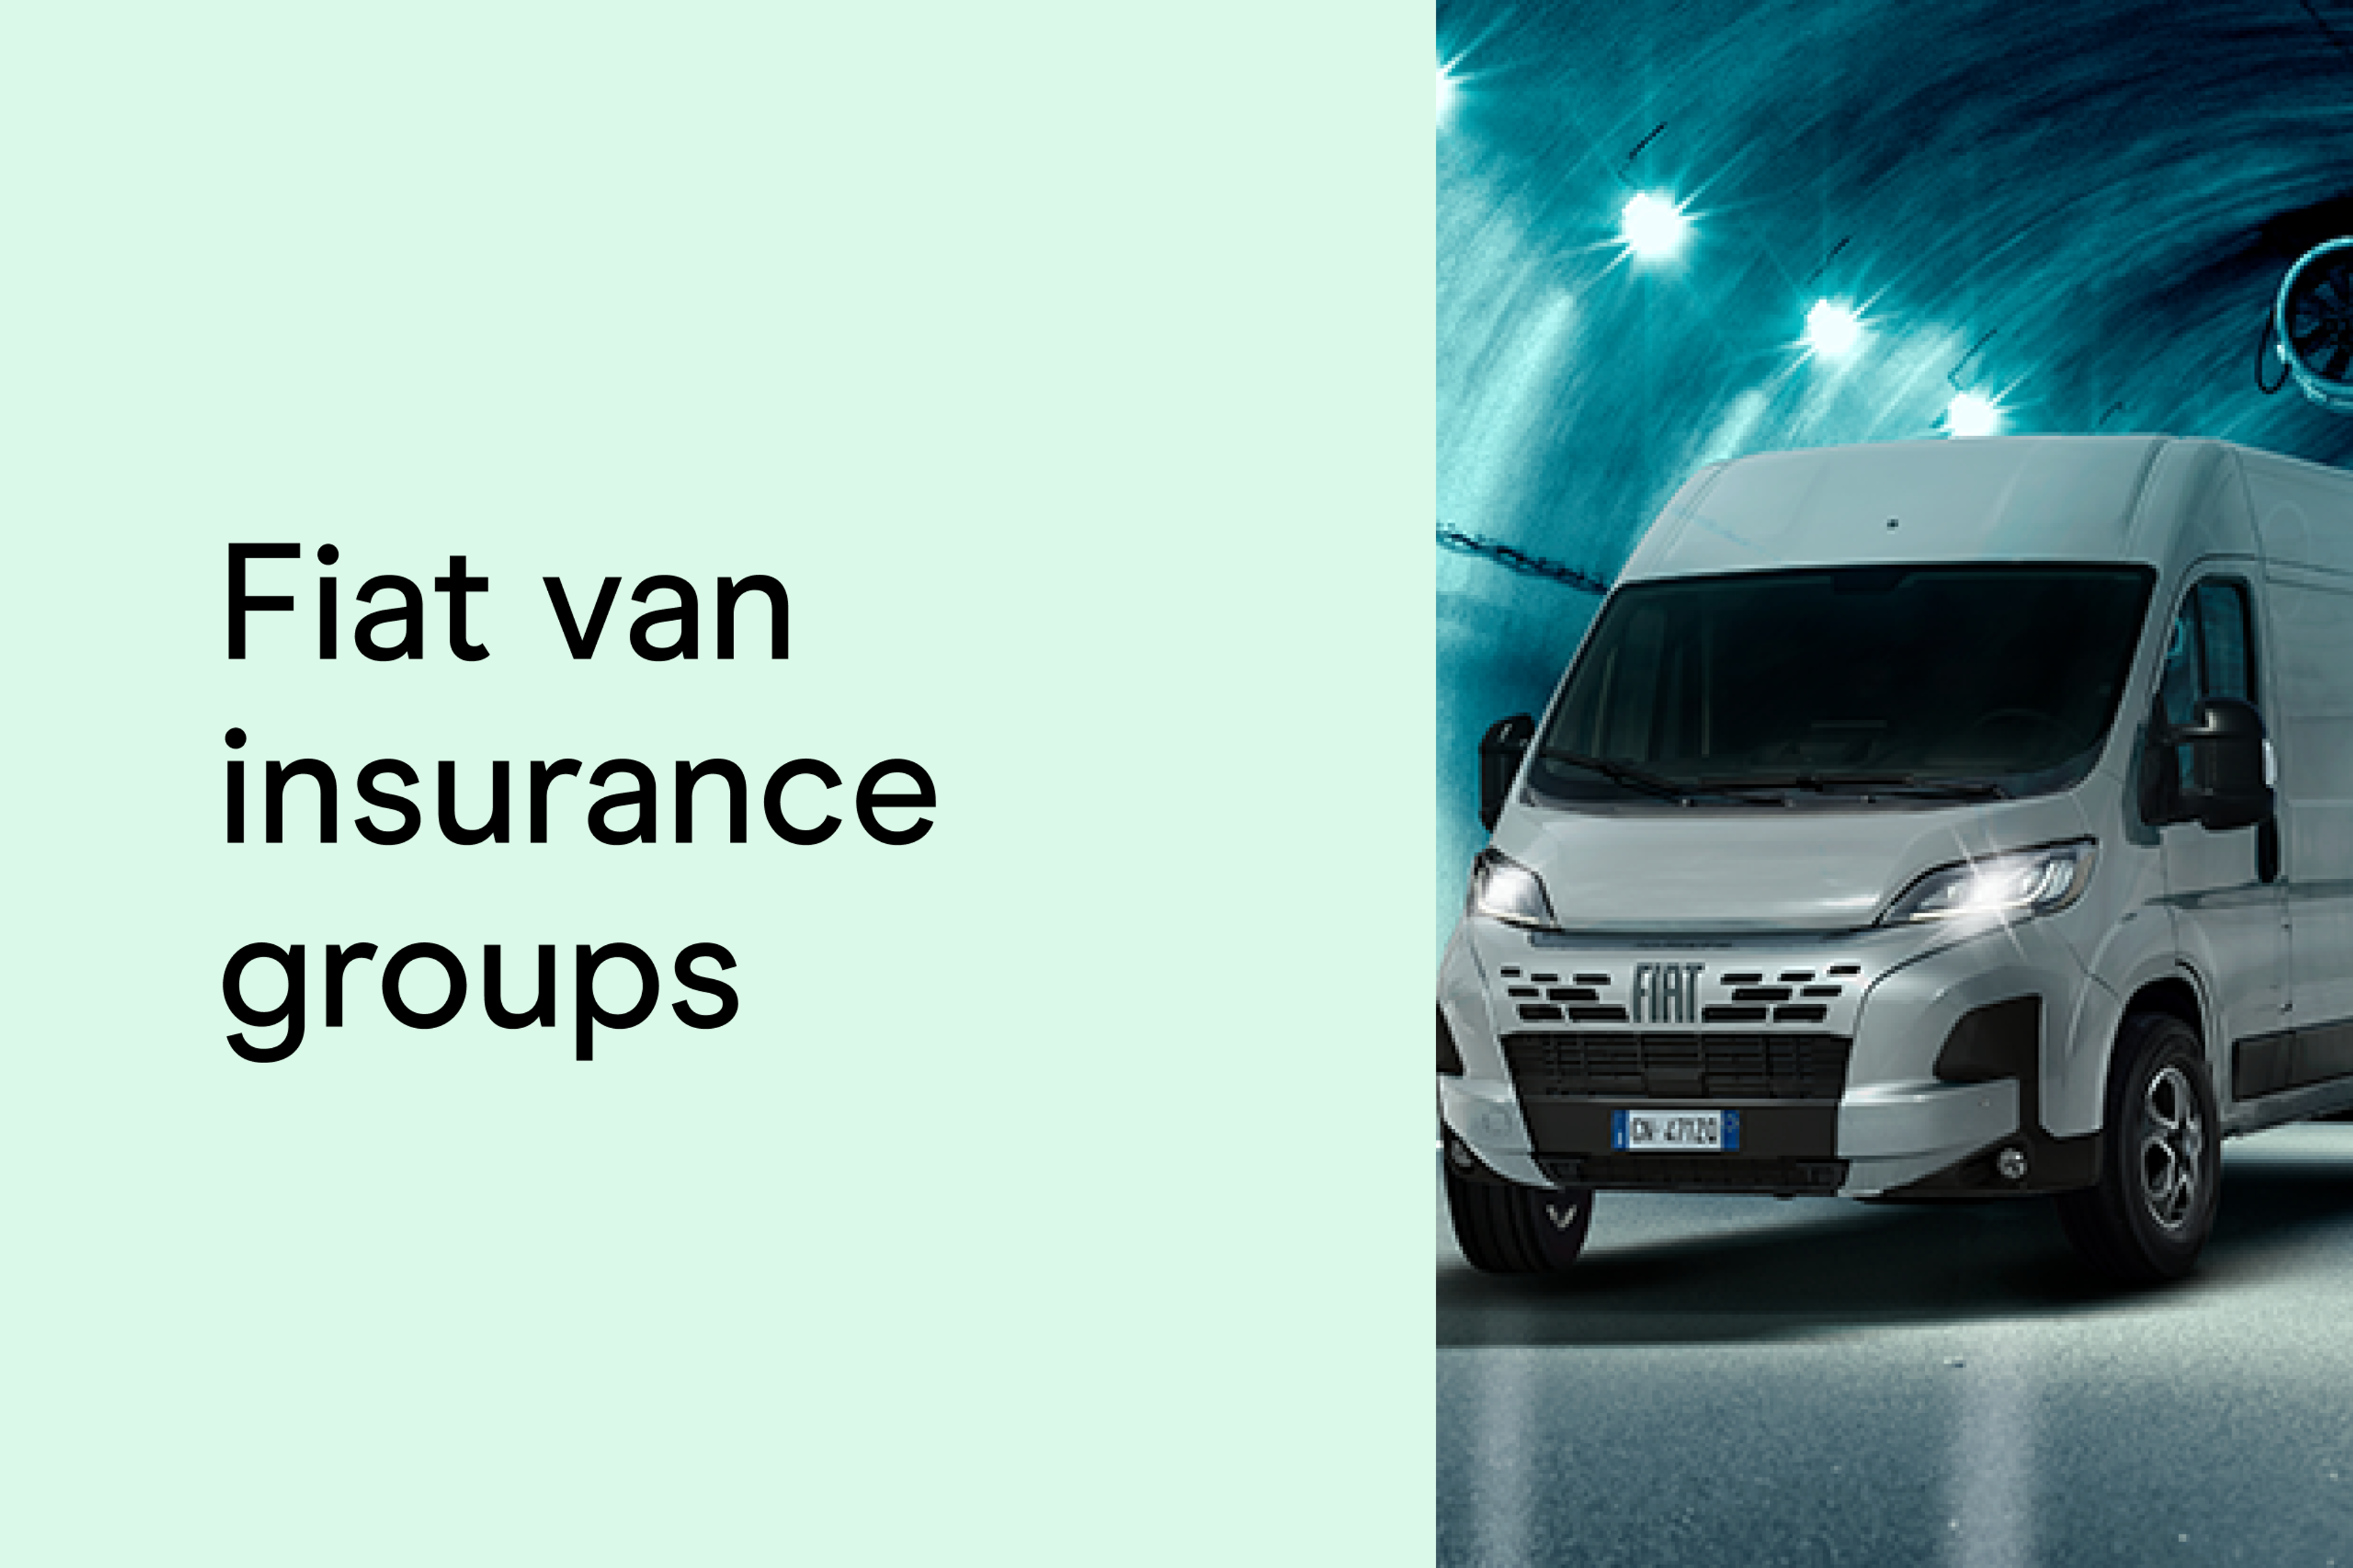 A guide to Fiat van insurance groups